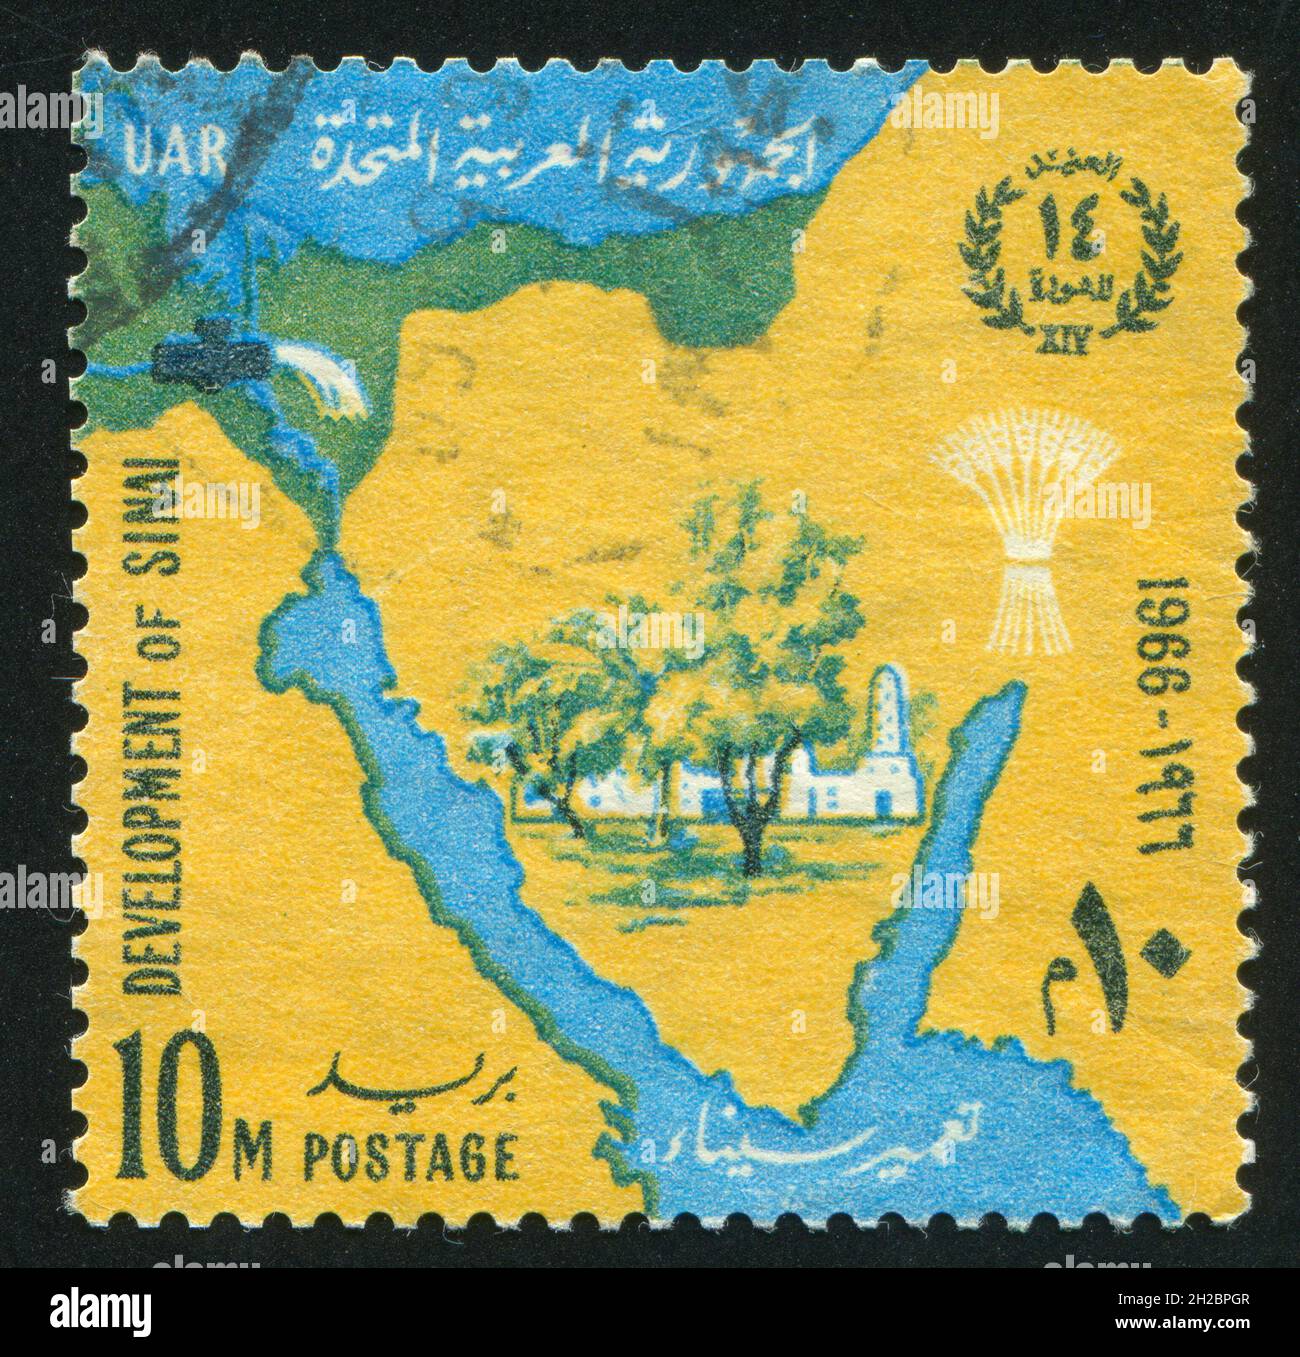 EGYPT - CIRCA 1966: stamp printed by Egypt, shows Map, building, trees, circa 1966 Stock Photo